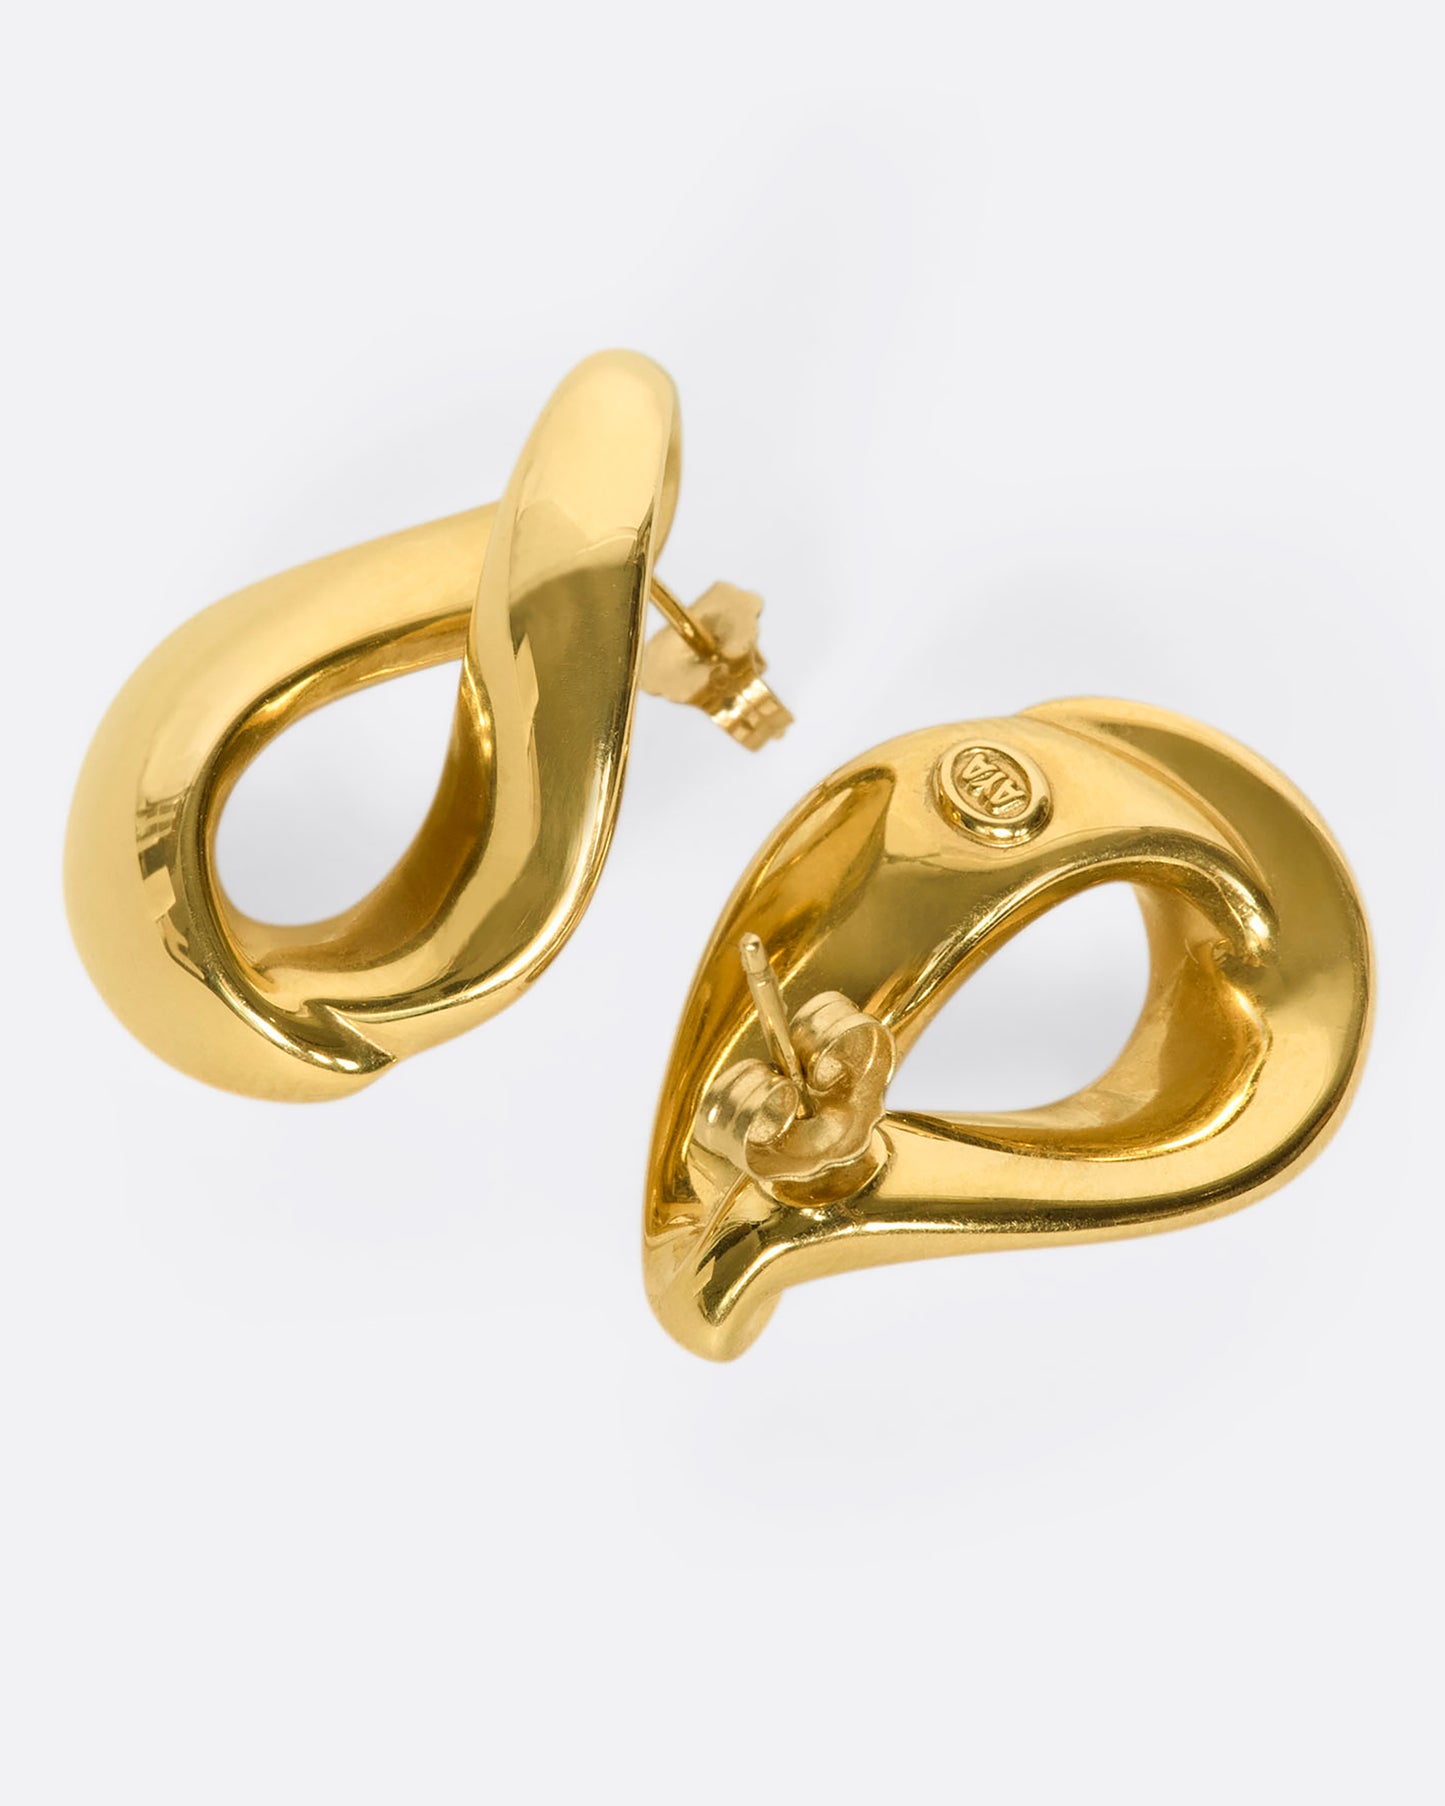 An elegant pair of 18k gold folded-hoop estate stud earrings. These are hollow and lightweight